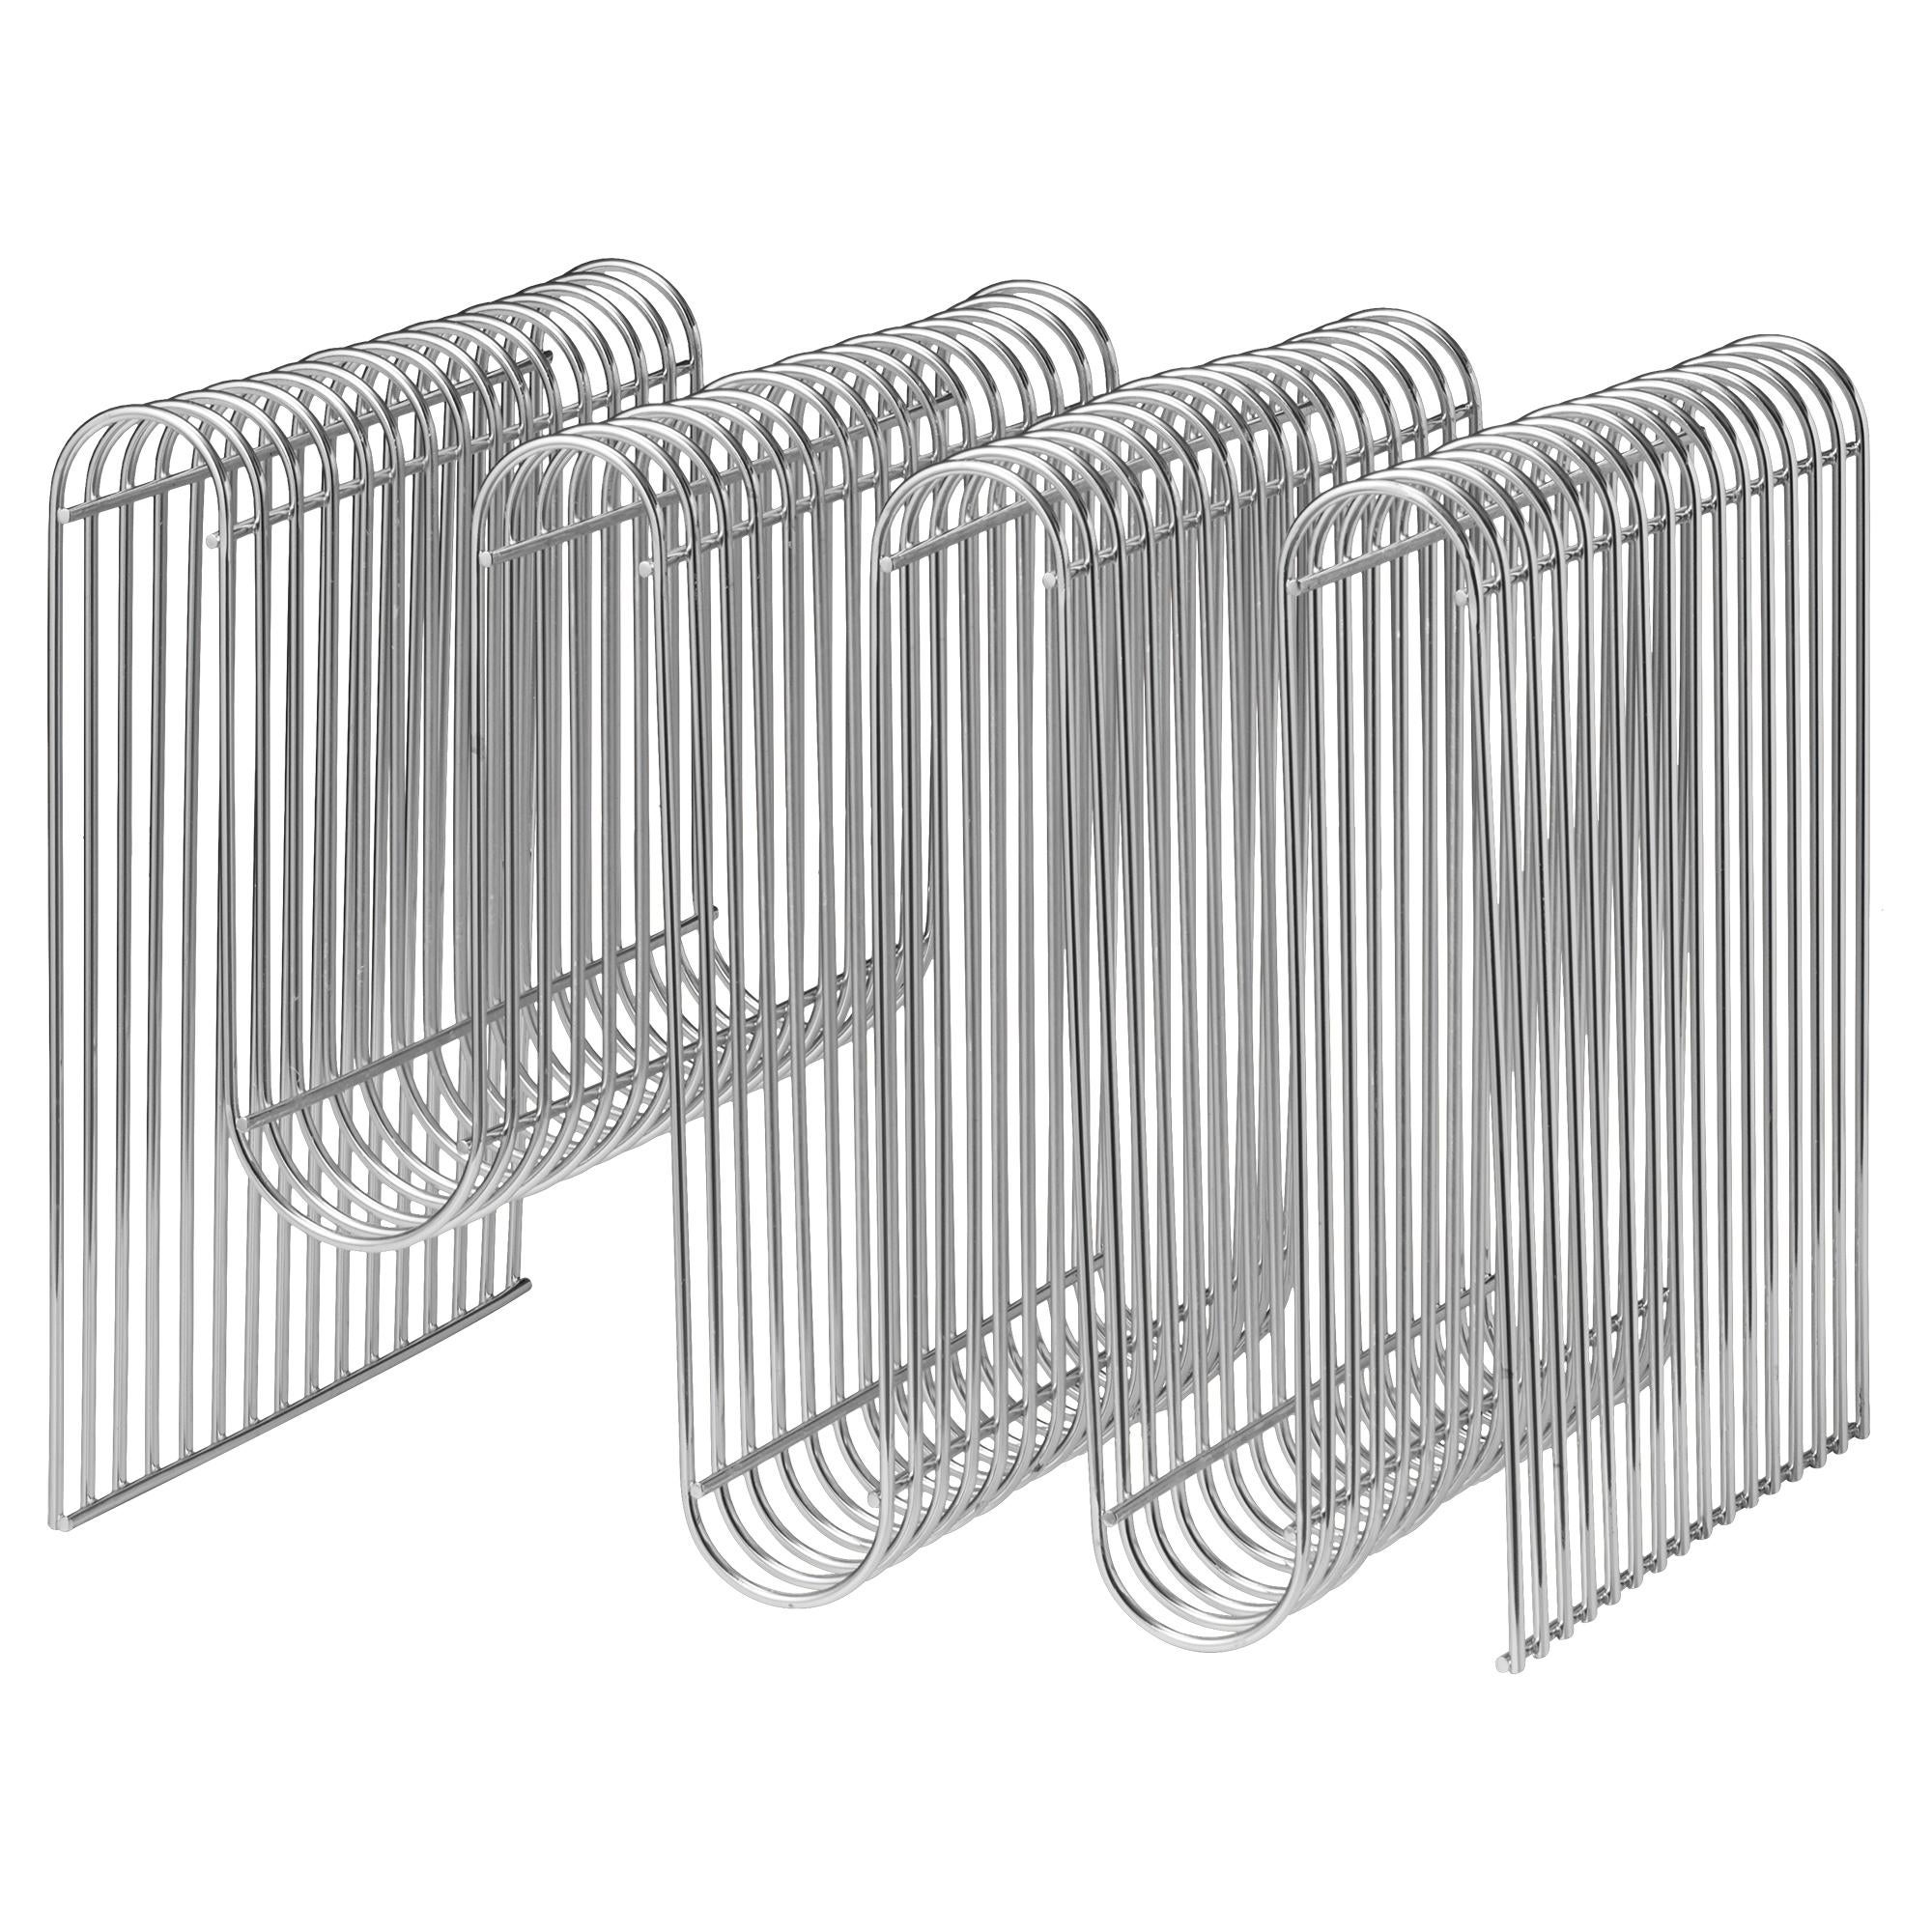 Silver contemporary magazine holder
Dimensions: L 40.5 x W 30.3 x H 30.3 cm 
Materials: Steel.
Also available in Gold and Black. 


The design of the Curva magazine holder has become an instant icon. The secret behind the success of this